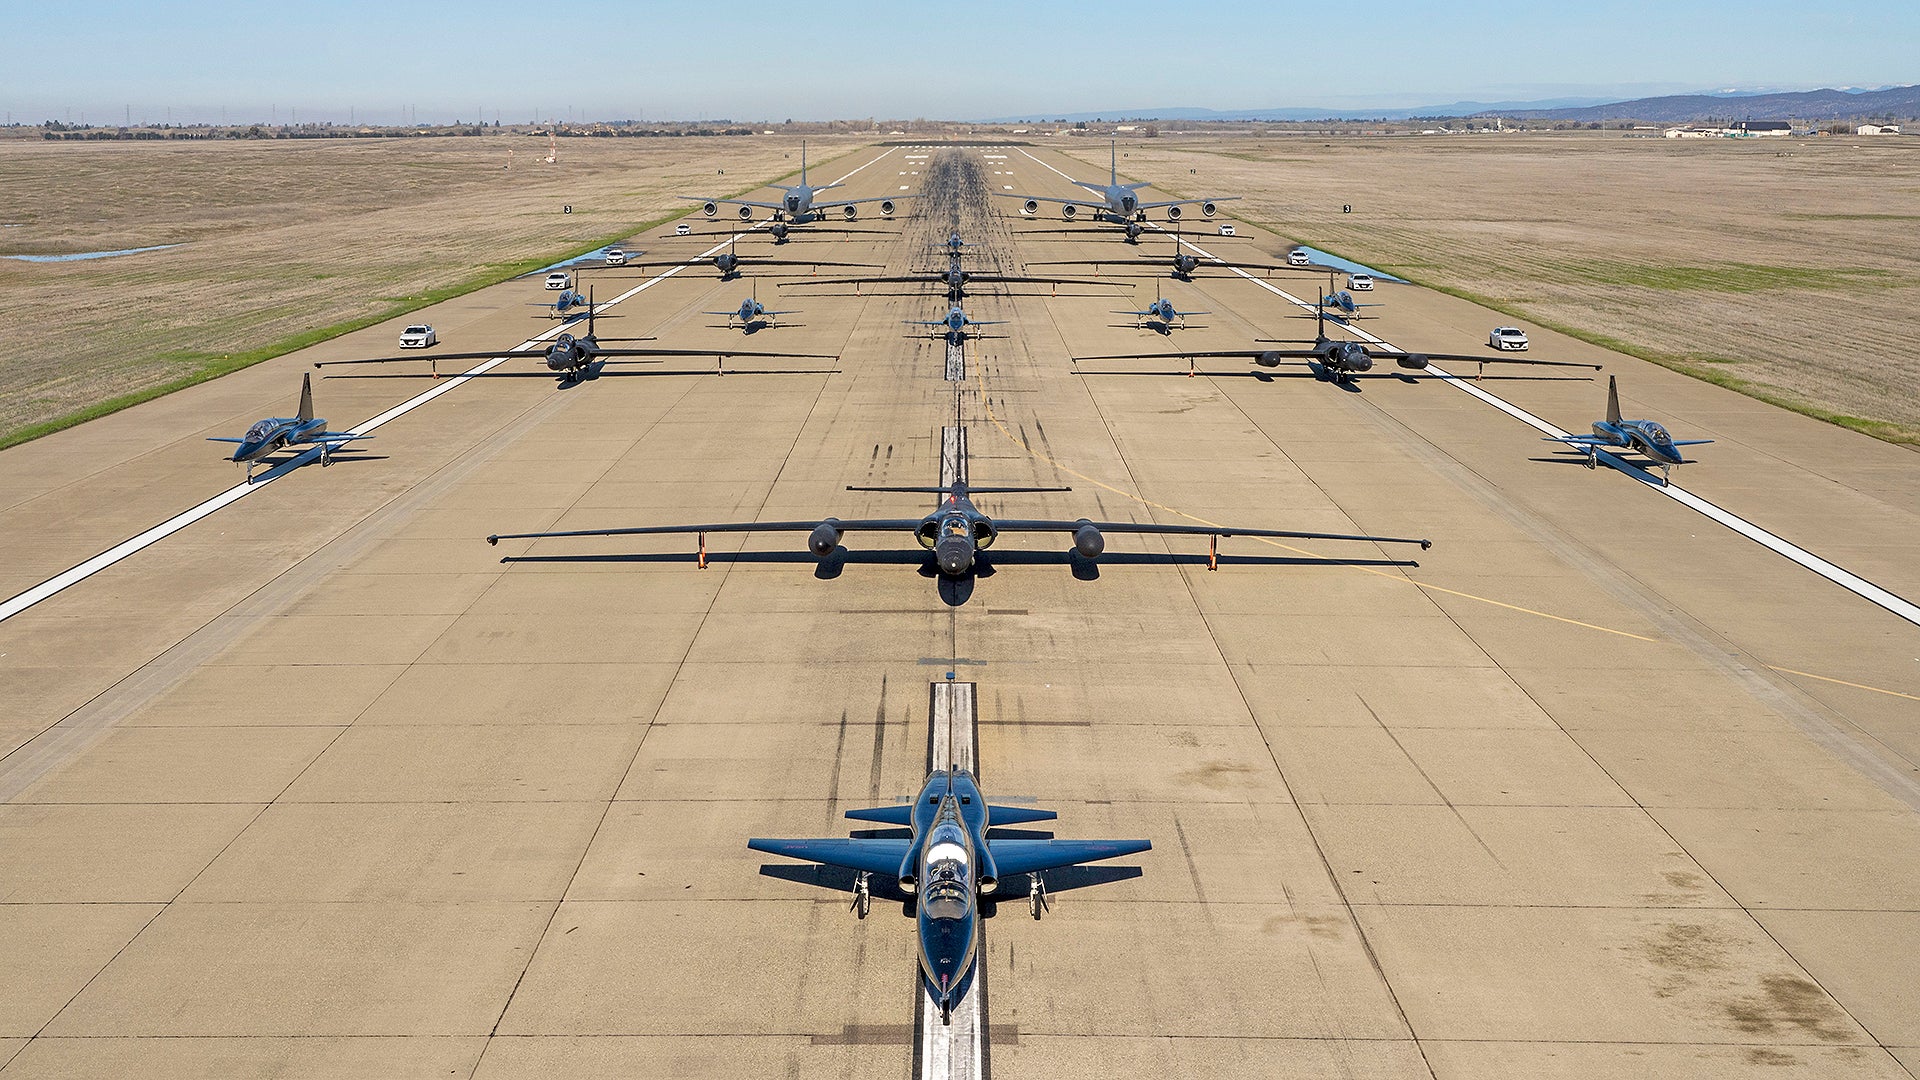 U.S. Air Force U-2 Dragon Lady’s and chase cars from the 99th Reconnaissance Squadron, T-38 Talon’s from the 1st Reconnaissance Squadron, and KC-135R Stratotanker’s from the 940th Air Refueling Wing conduct an elephant walk on Beale Air Force Base, California, Jan. 4, 2023. The elephant walk showcased a display of joint airpower between the wings hosted at Beale. (U.S. Air Force photo by Senior Airman Juliana Londono)